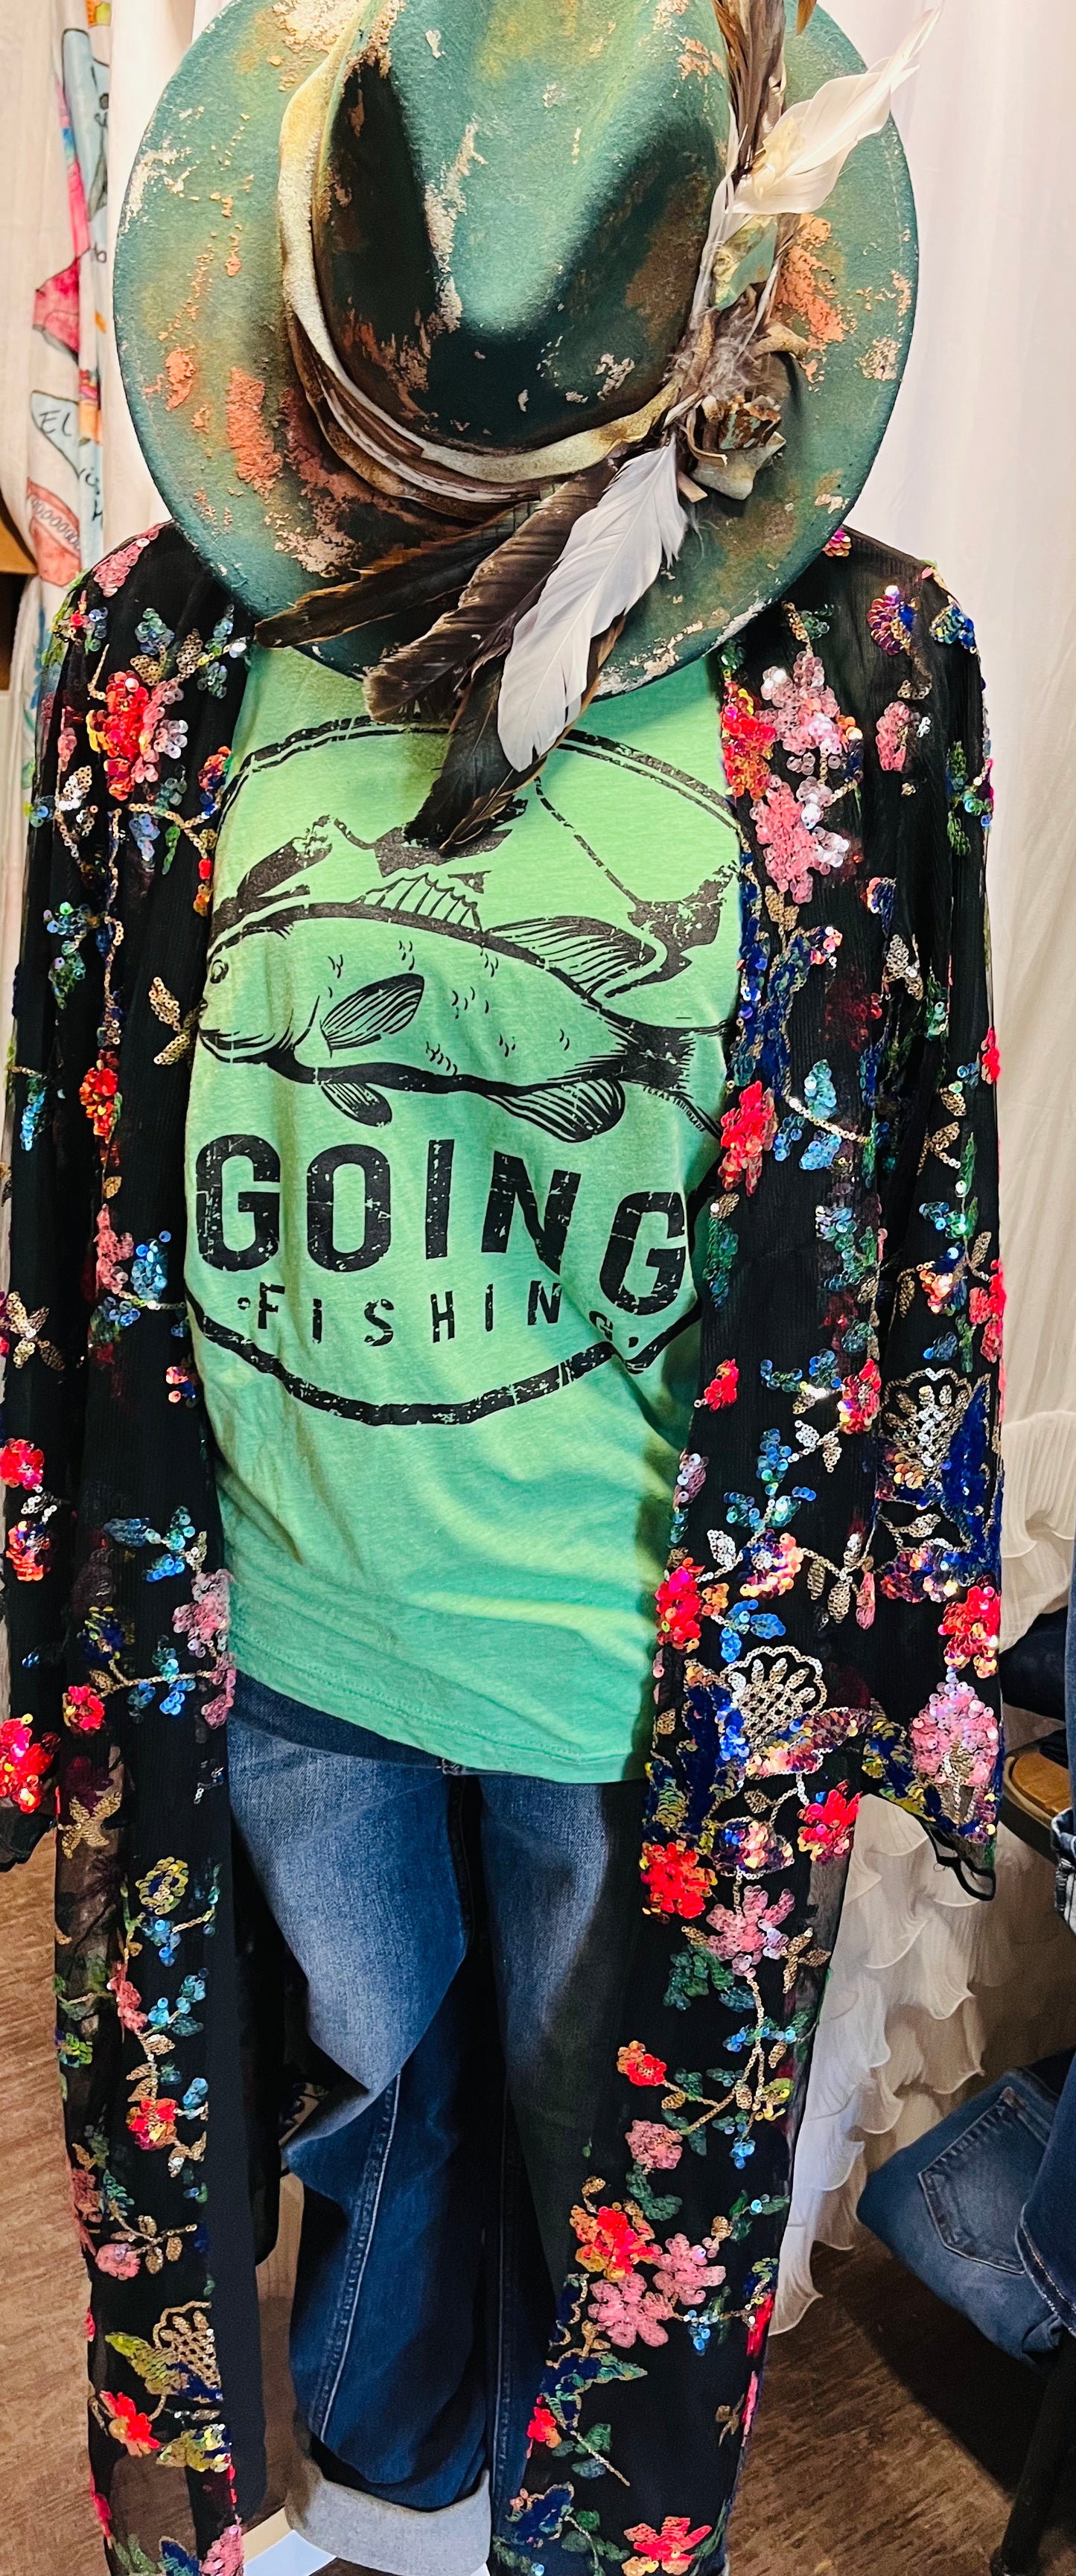 Going Fishing - 30% off!